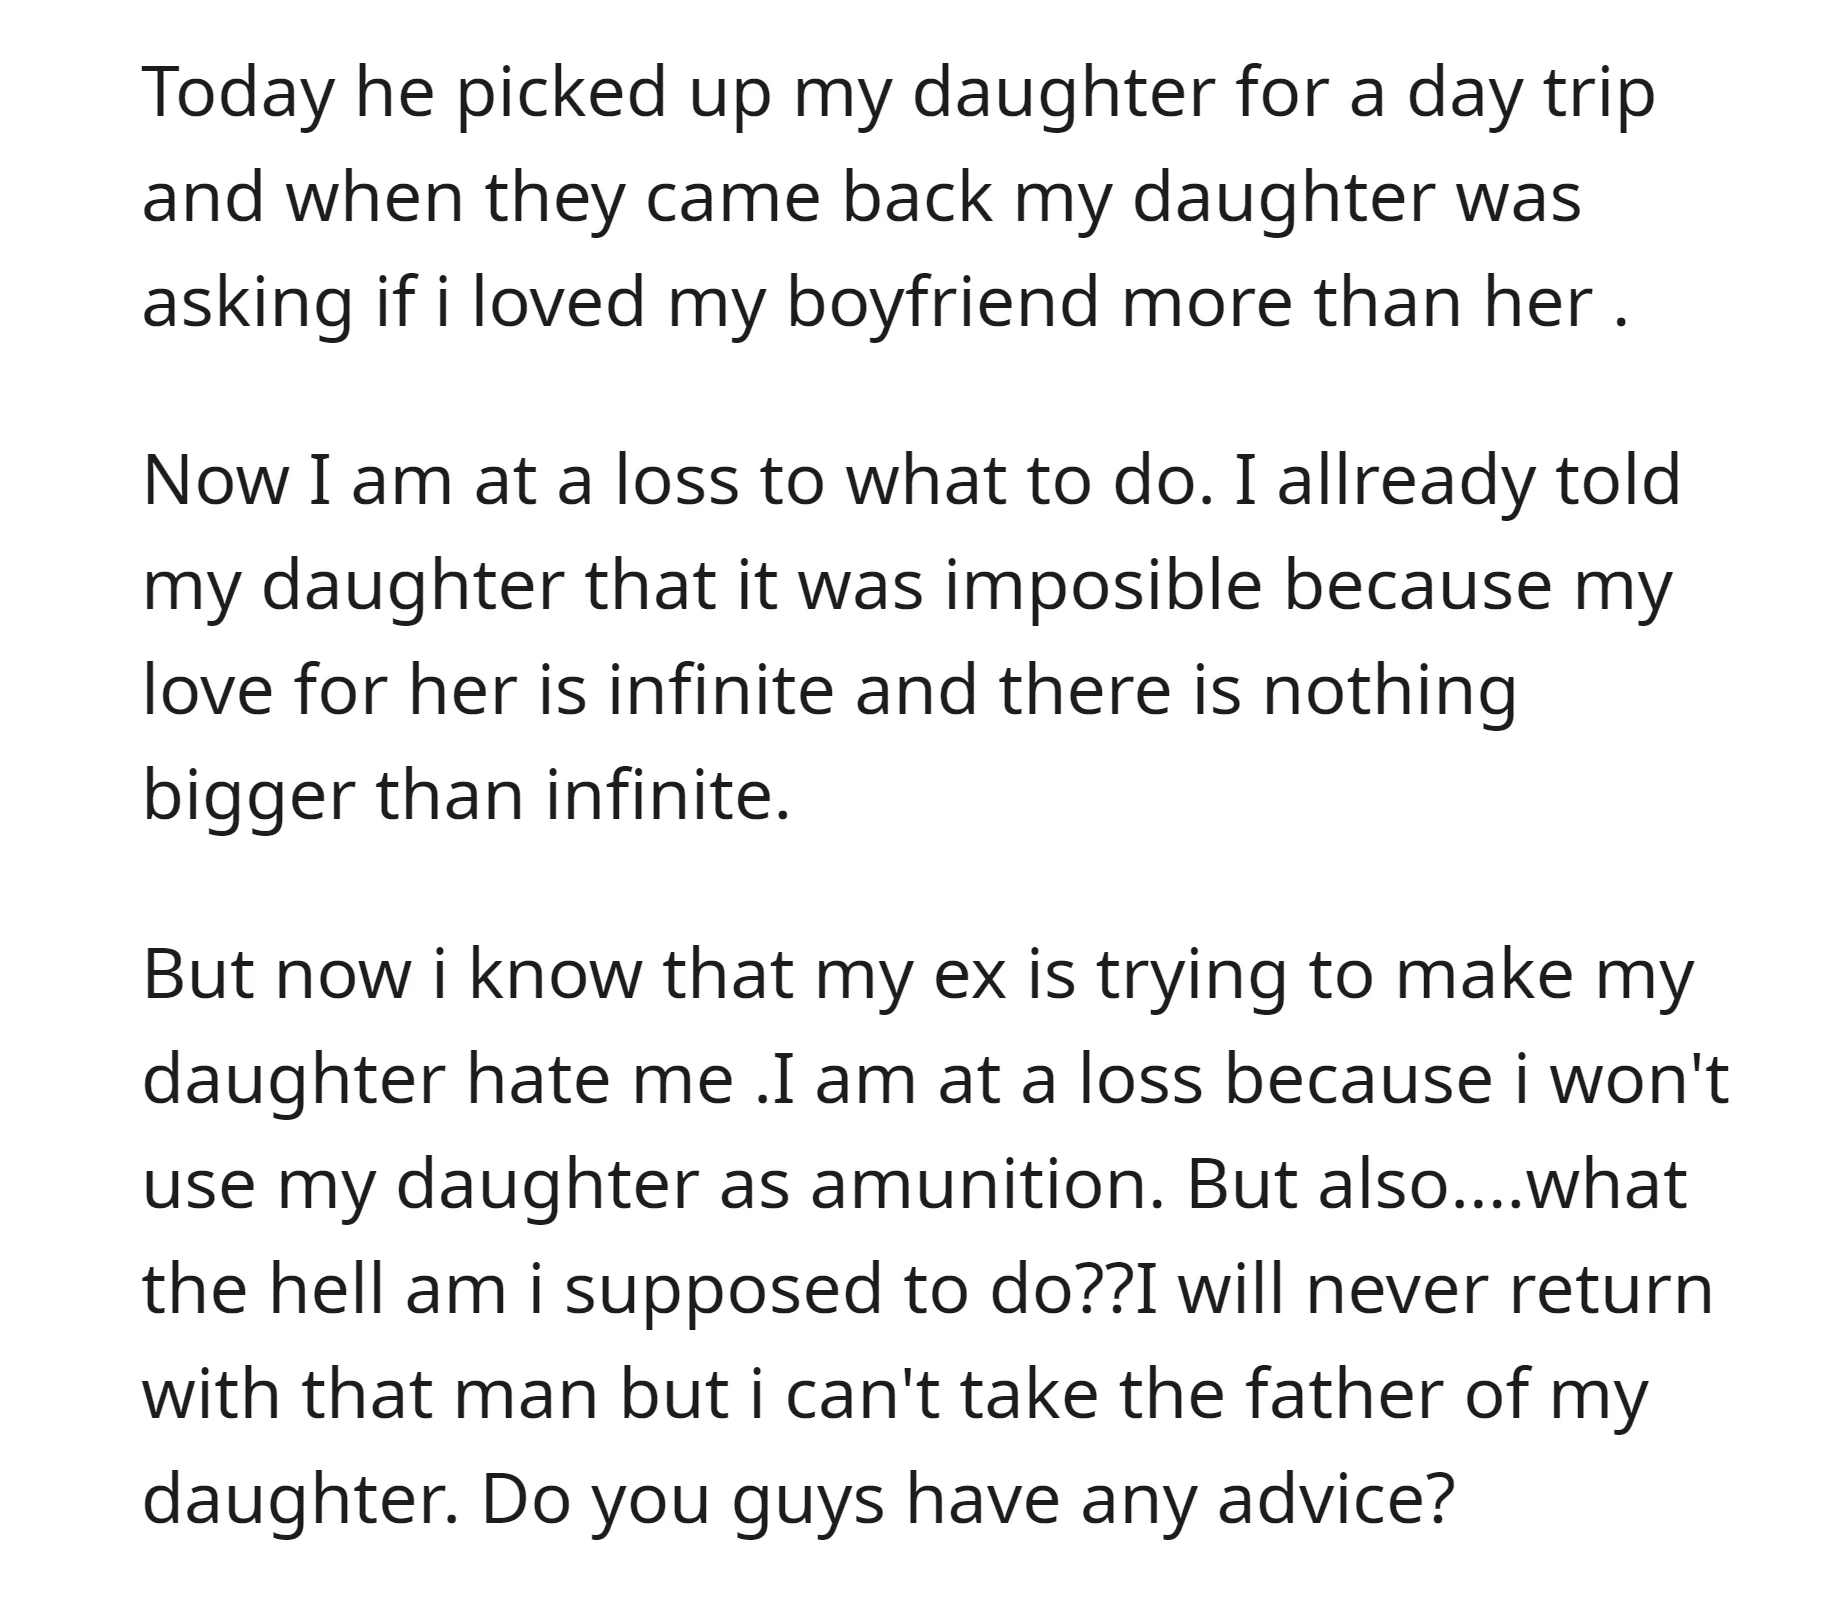 The ex-husband's trying to manipulate her daughter's feelings